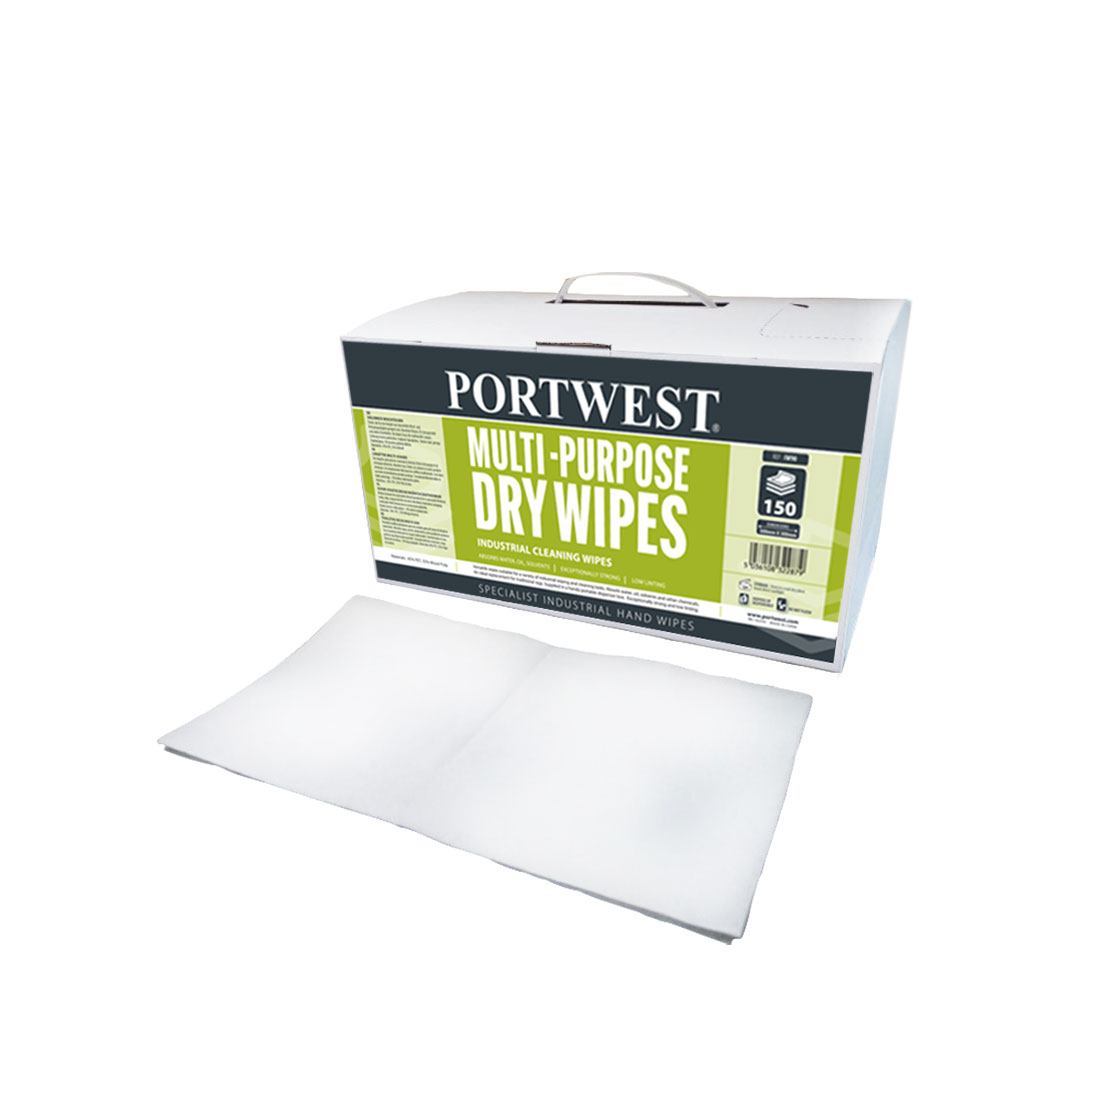 PORTWEST Hand Wipes 150 WIPES Antibacterial Cleaning Industrial Heavy Duty IW10 